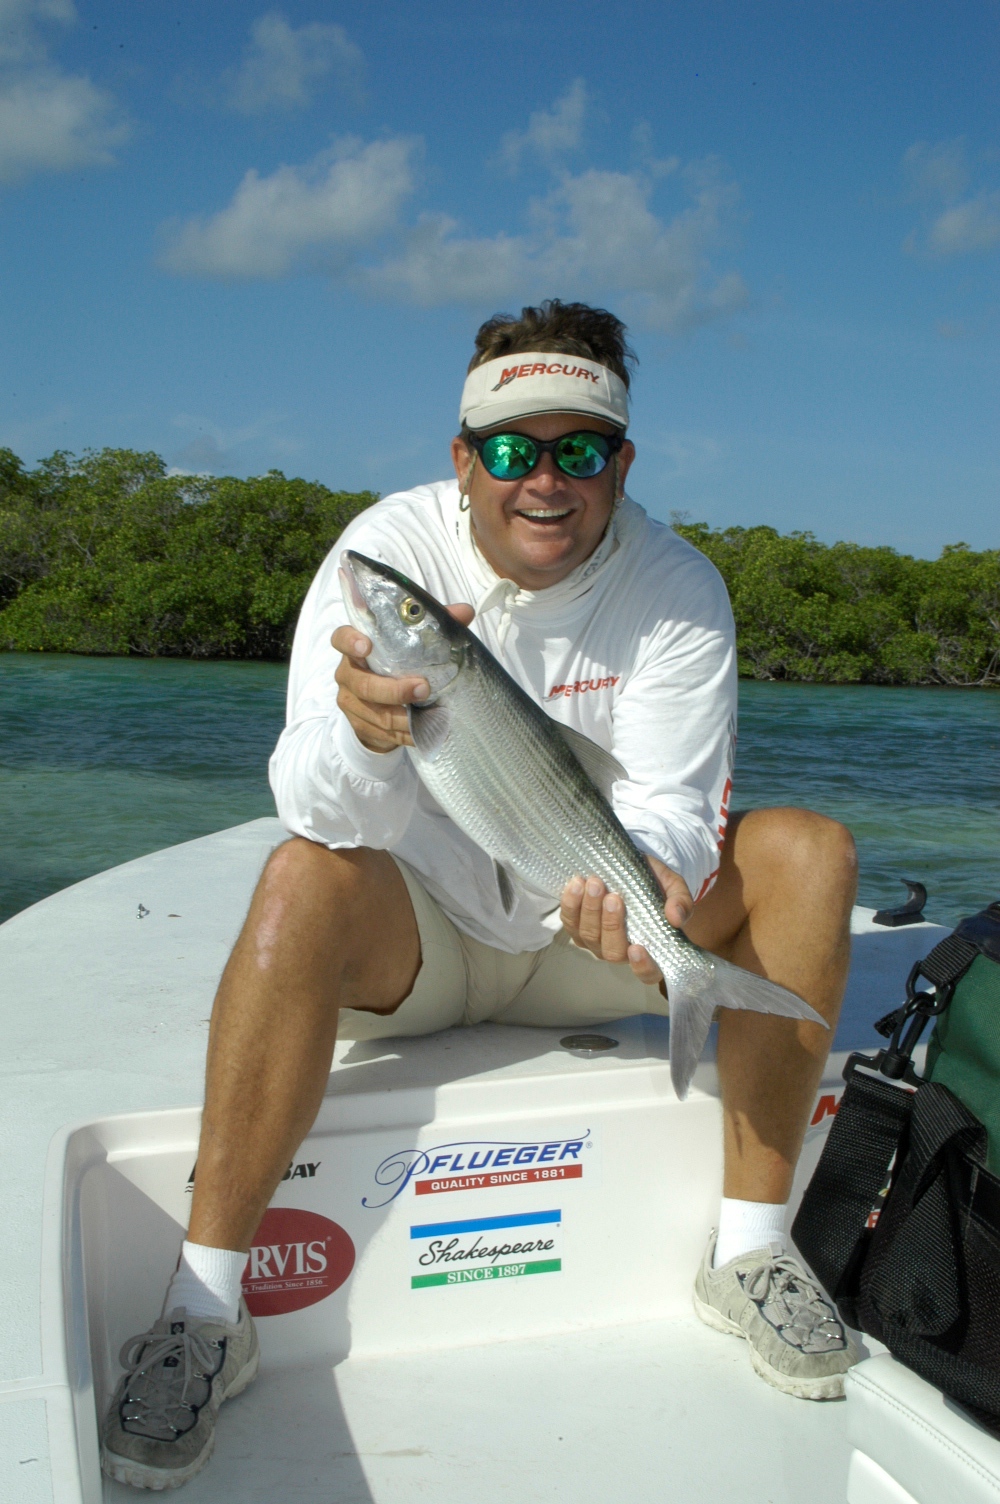 Fishing Gear And Equipment - Key West Fishing Charters Go With Capt. Steven  Lamp